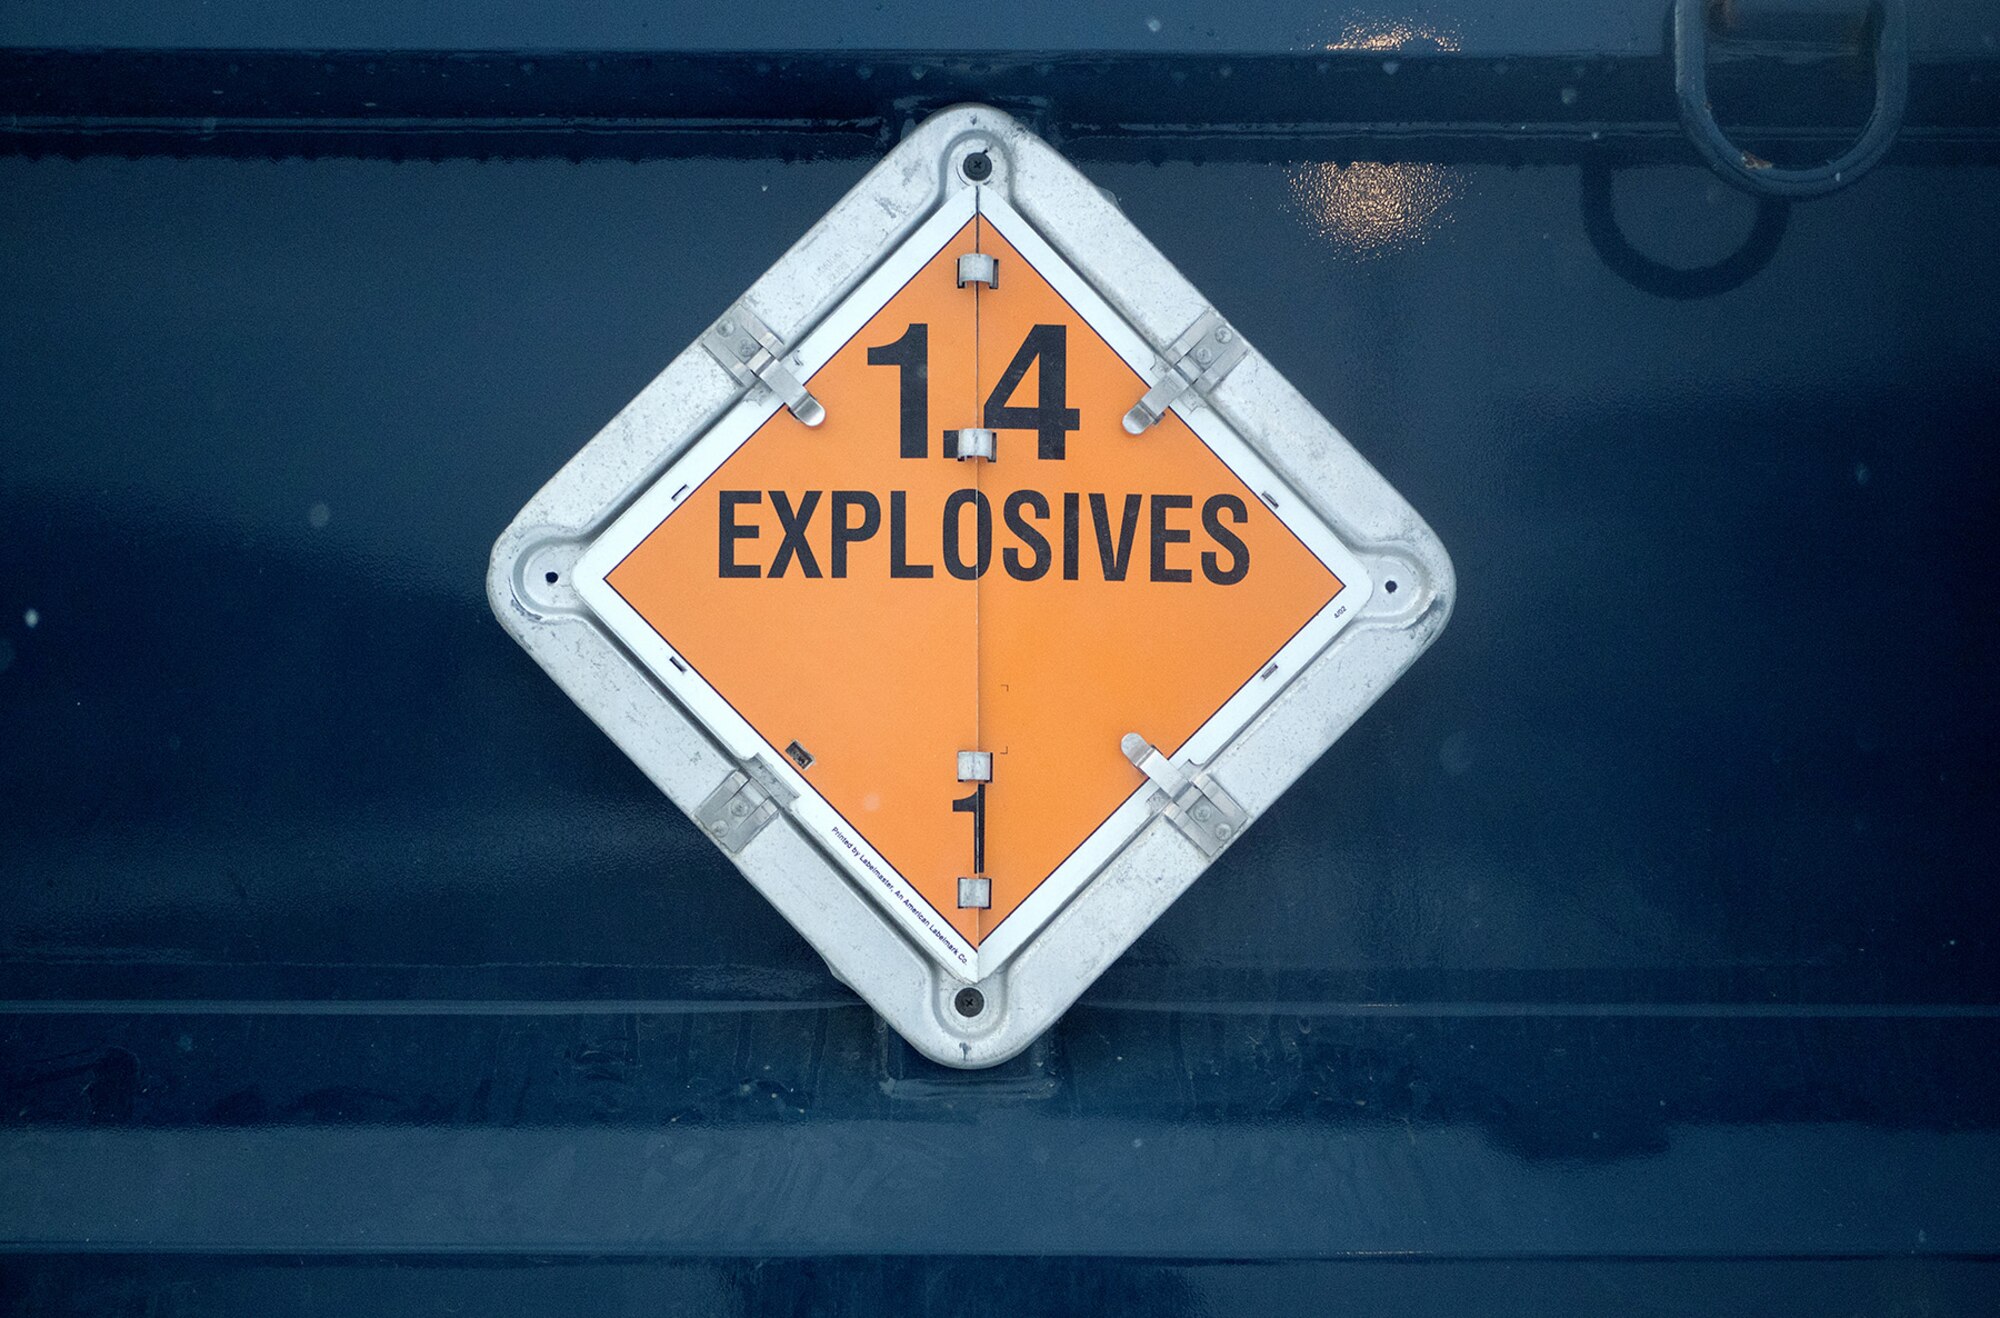 An explosives sign is seen on the side of a vehicle transporting ammunition for Airmen assigned to the 673d Security Forces Squadron conducting an M249 Squad Automatic Weapon, and M2 .50 Caliber machine gun qualification range on Joint Base Elmendorf-Richardson, Alaska, Jan. 10, 2018. Security Forces Airmen perform extensive training in law enforcement as well as combat tactics to protect U.S. Military bases and assets both stateside and overseas.